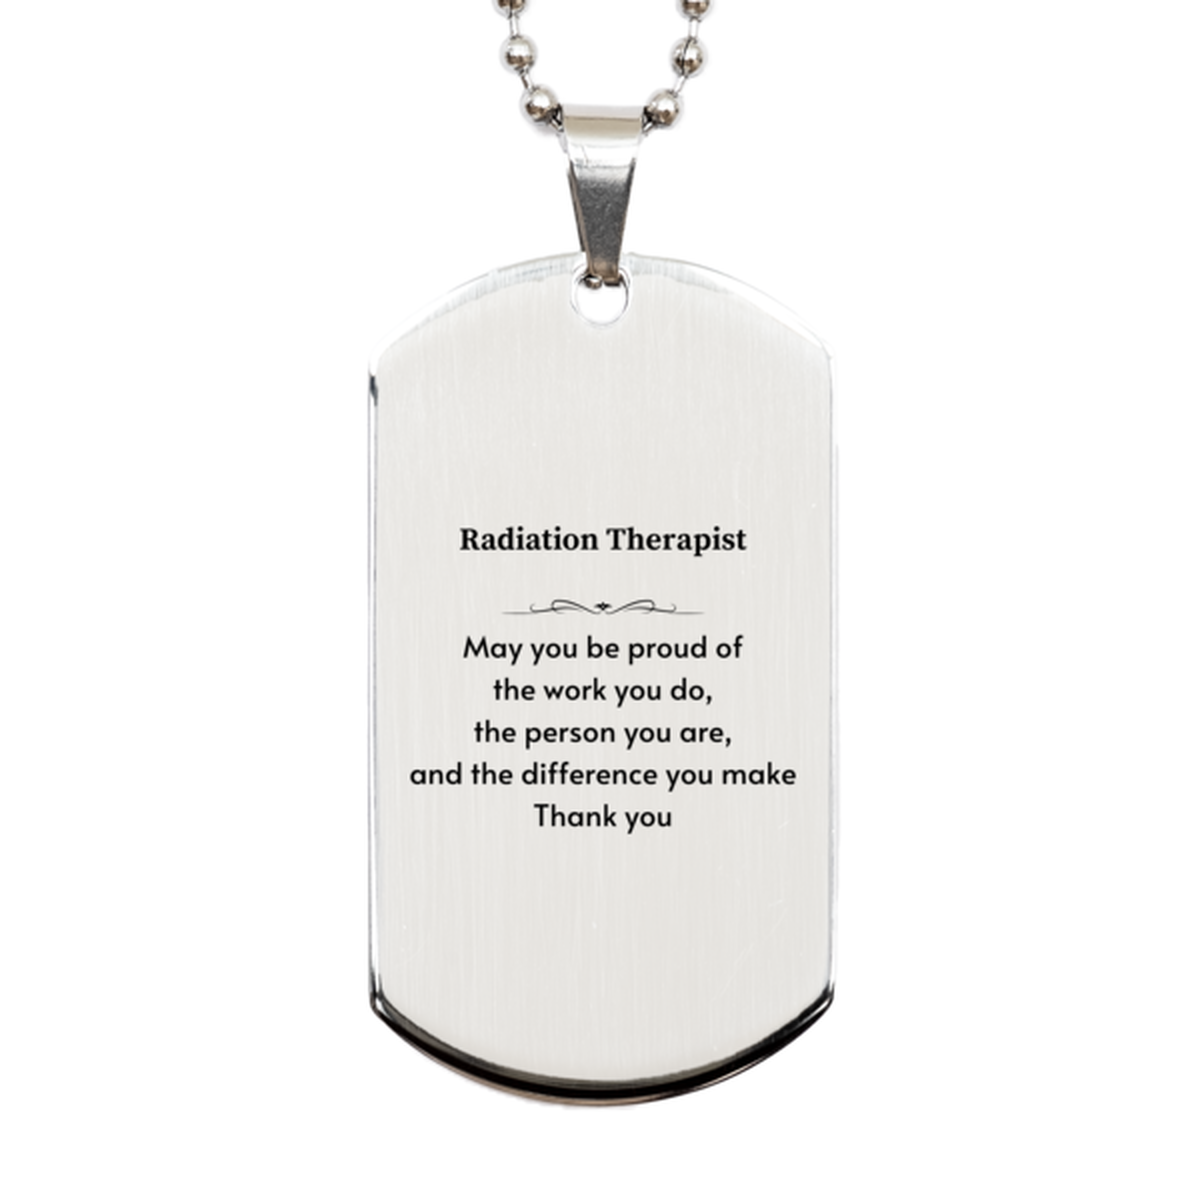 Heartwarming Silver Dog Tag Retirement Coworkers Gifts for Radiation Therapist, Radiation Therapist May You be proud of the work you do, the person you are Gifts for Boss Men Women Friends